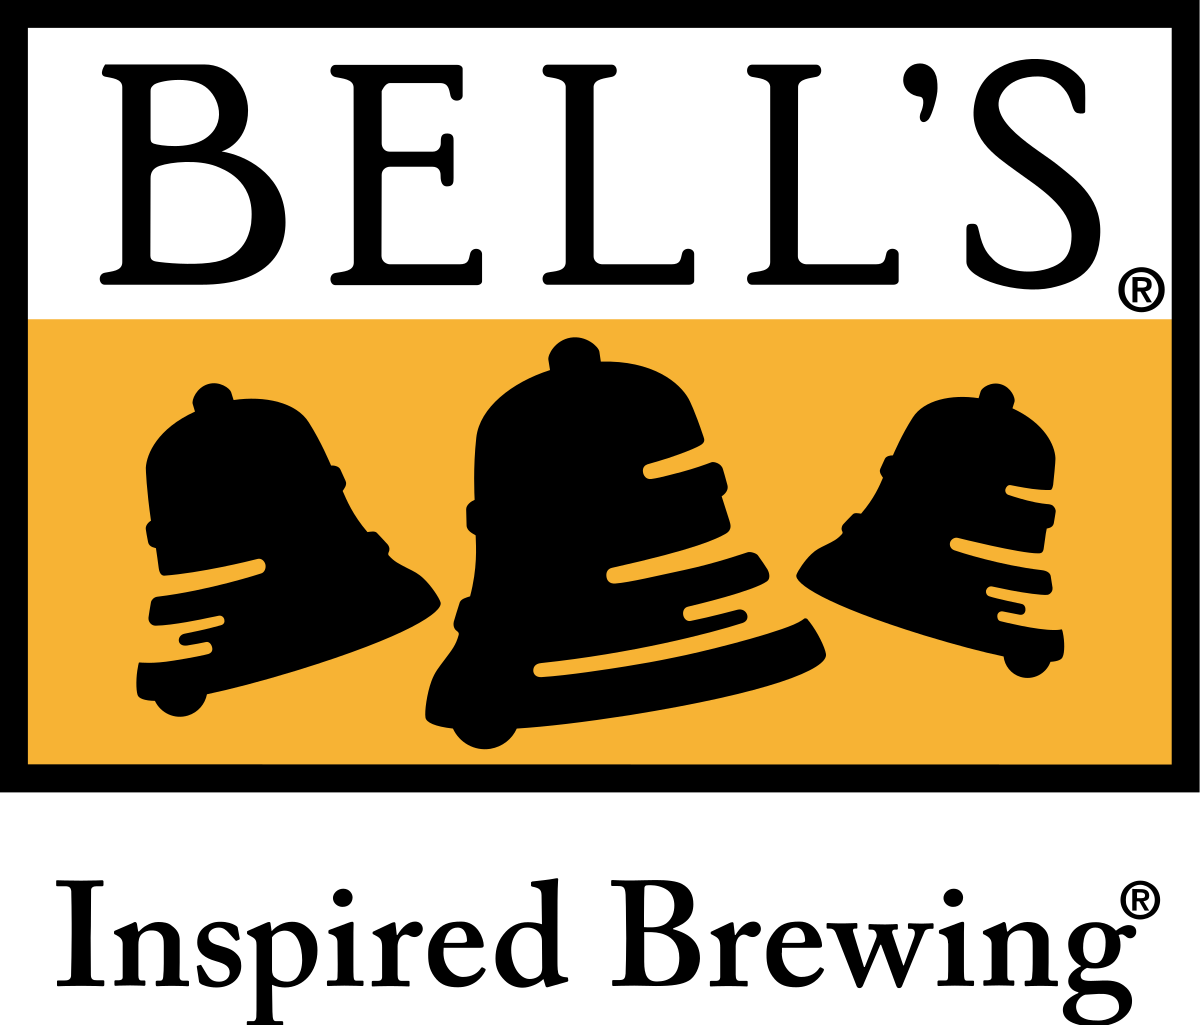 Larry Bell Founder of Bell’s Brewery and Upper Hand Brewery - Portland Beer Podcast Episode 7 by Steven Shomler